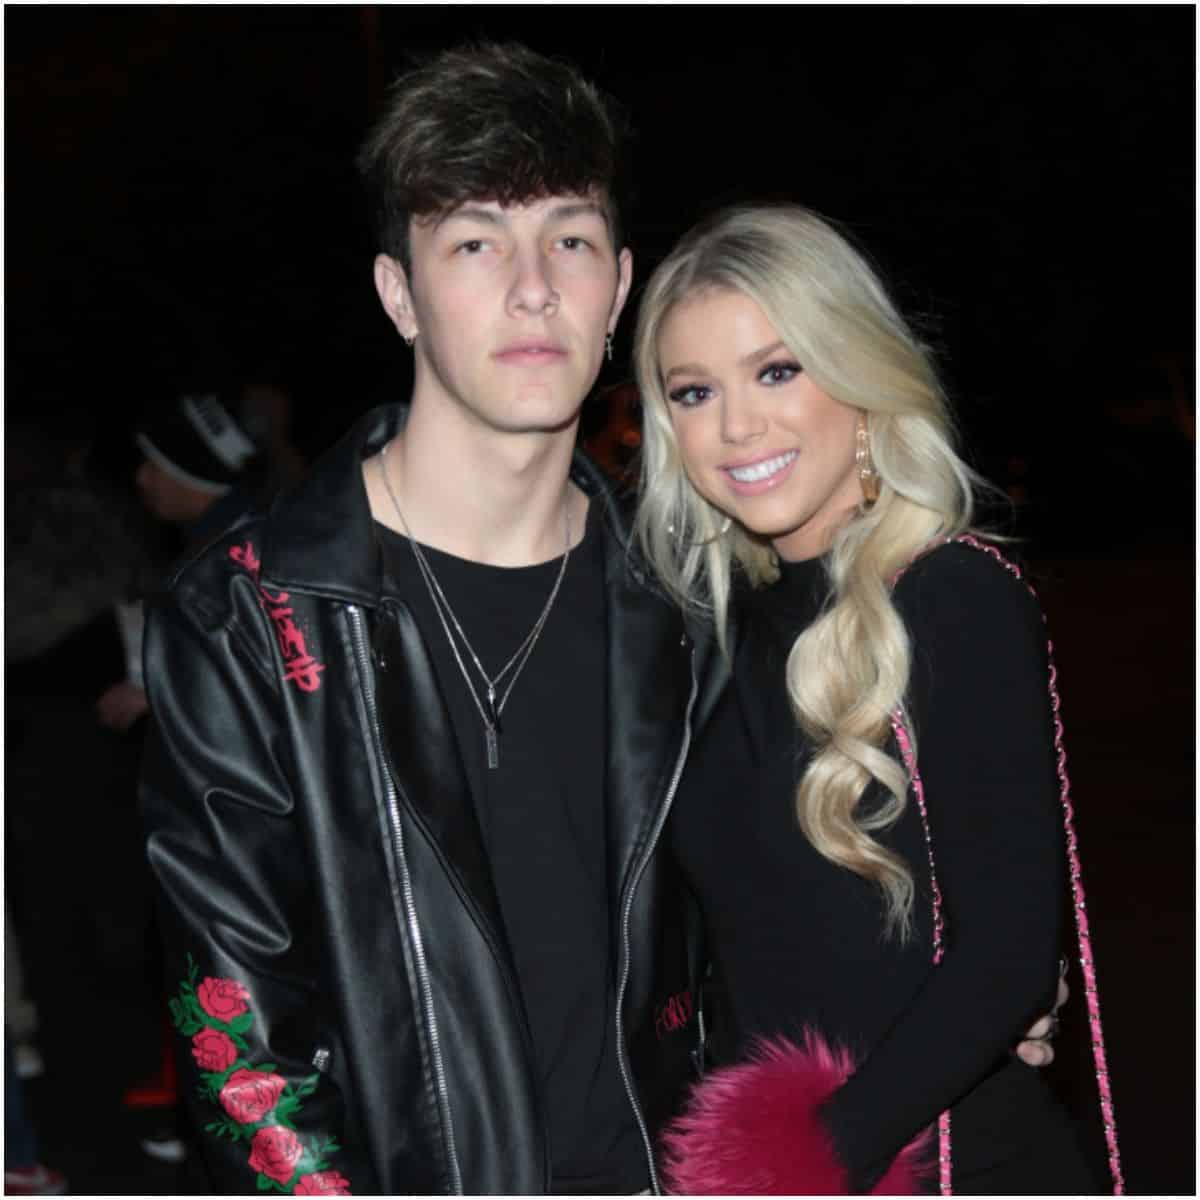 Tayler Holder with his girlfriend Kaylyn Slevin